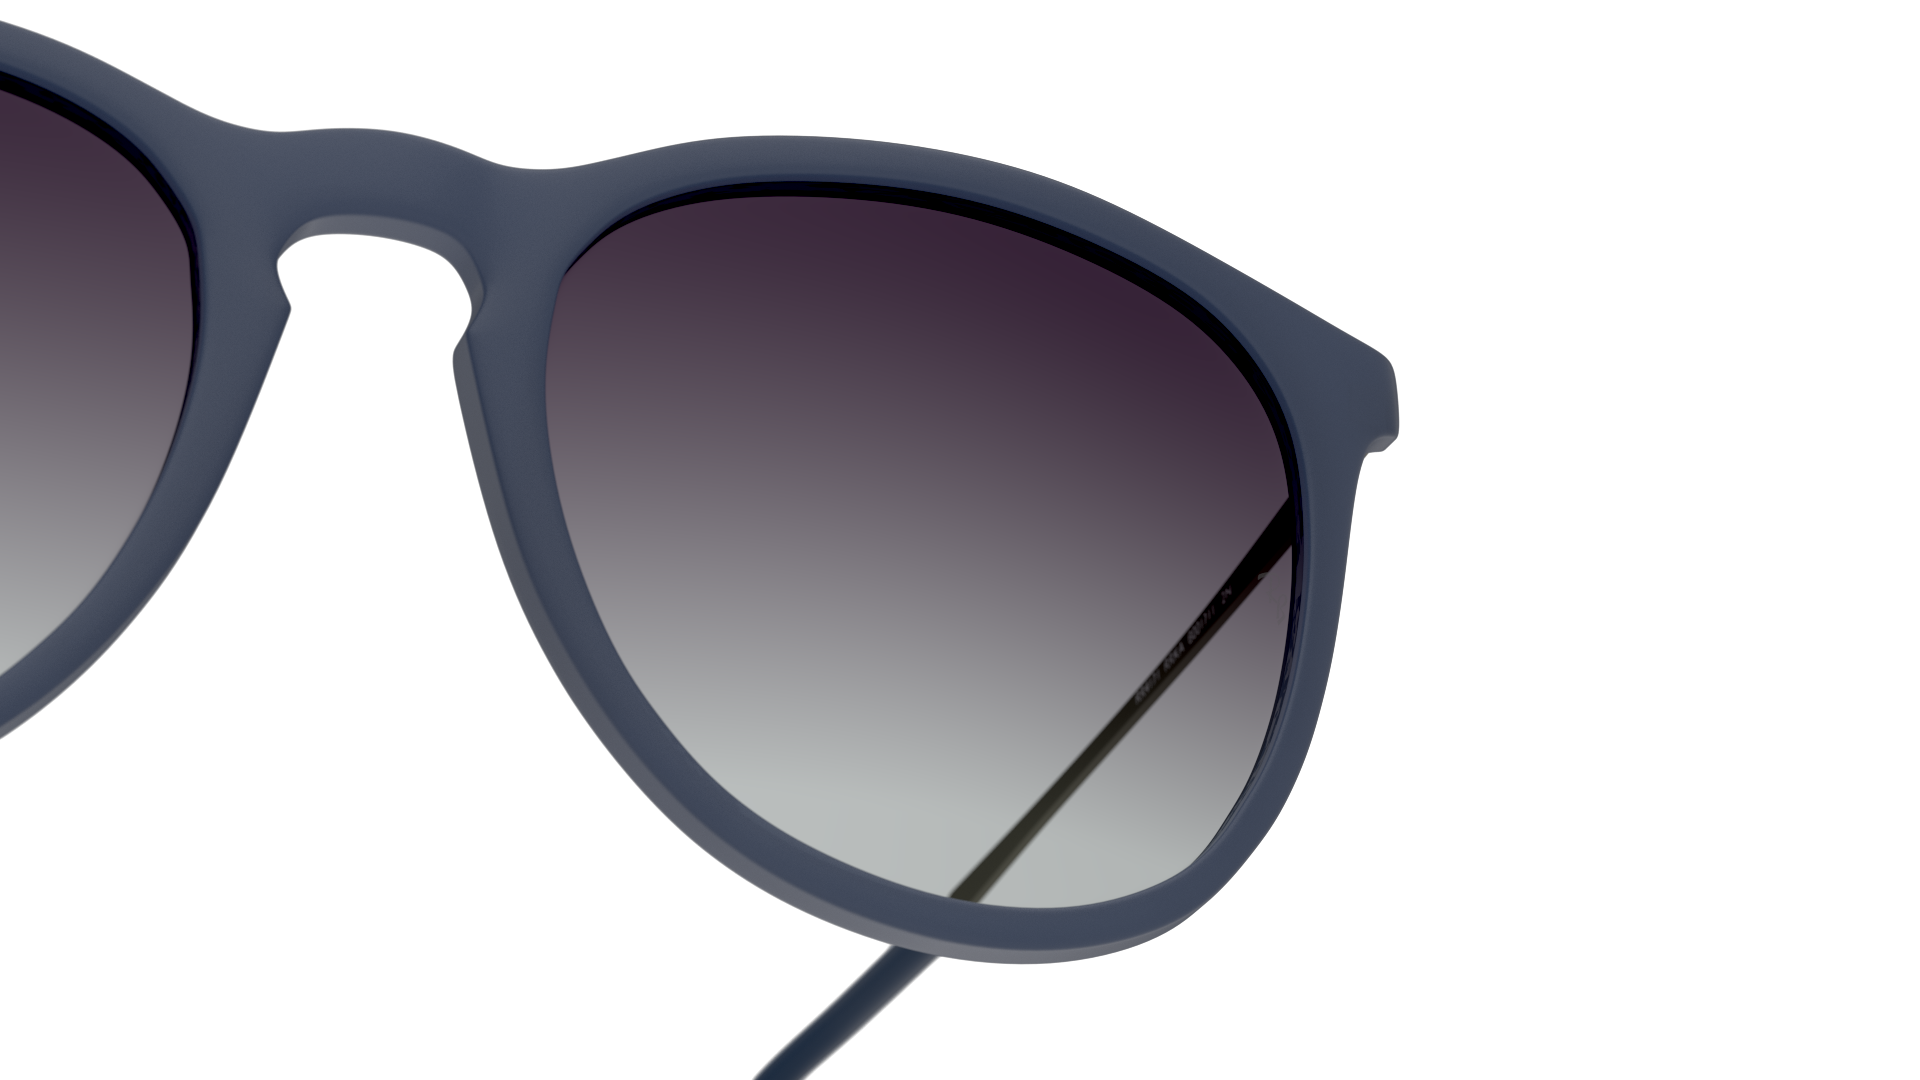 [products.image.detail01] RAY-BAN RB4171 60028G